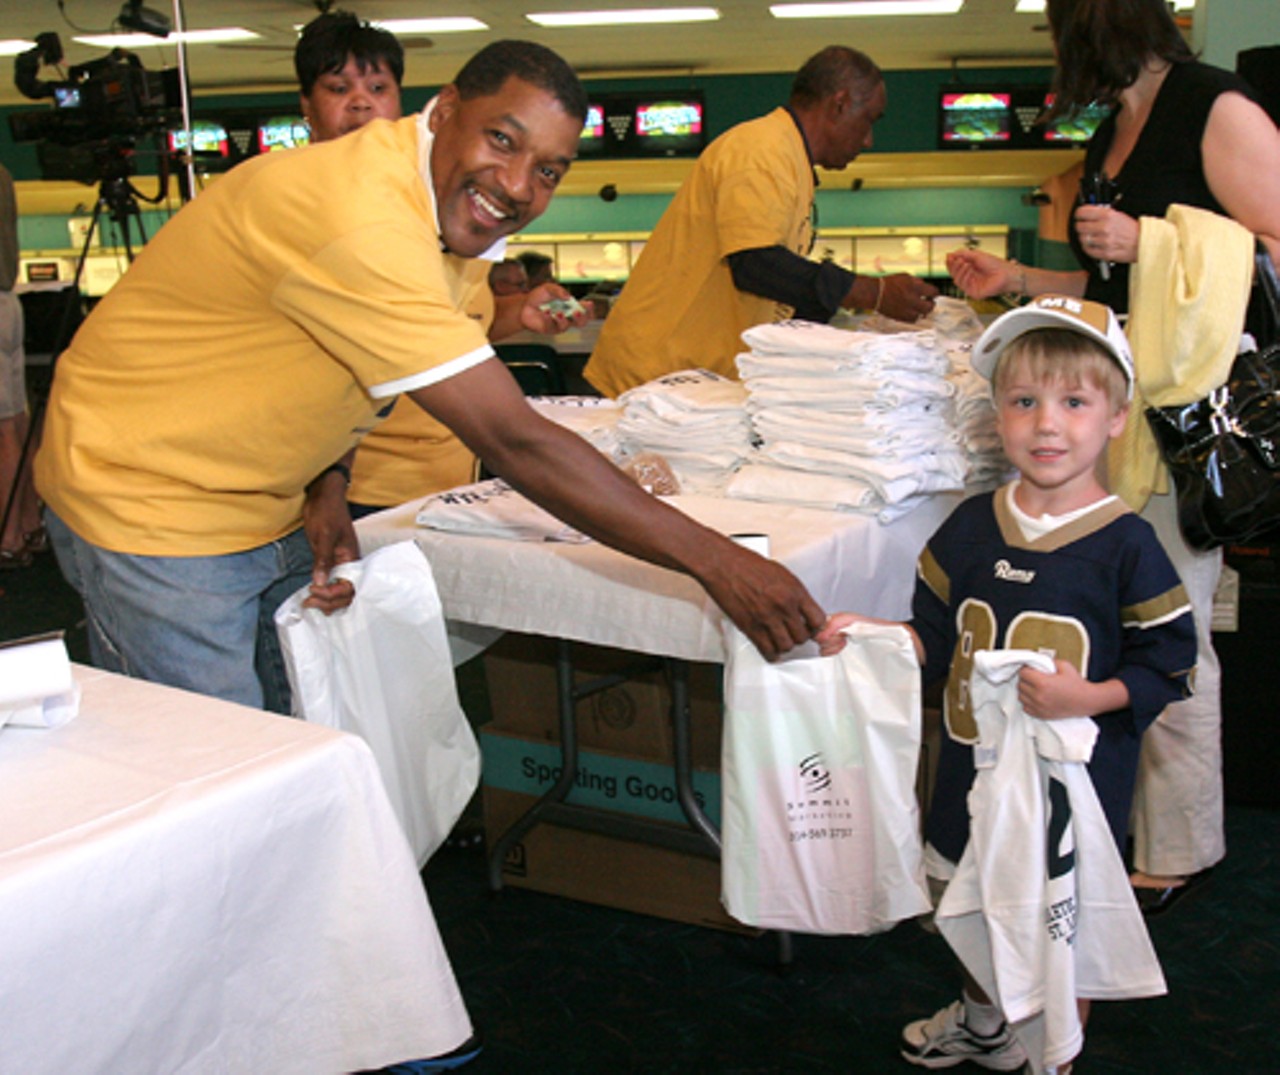 Rams fans of all ages went to Tropicana Lanes to see Rams players and bowl. Shown getting some goodies from Dwane Gibson is Kirk Briden, 5.